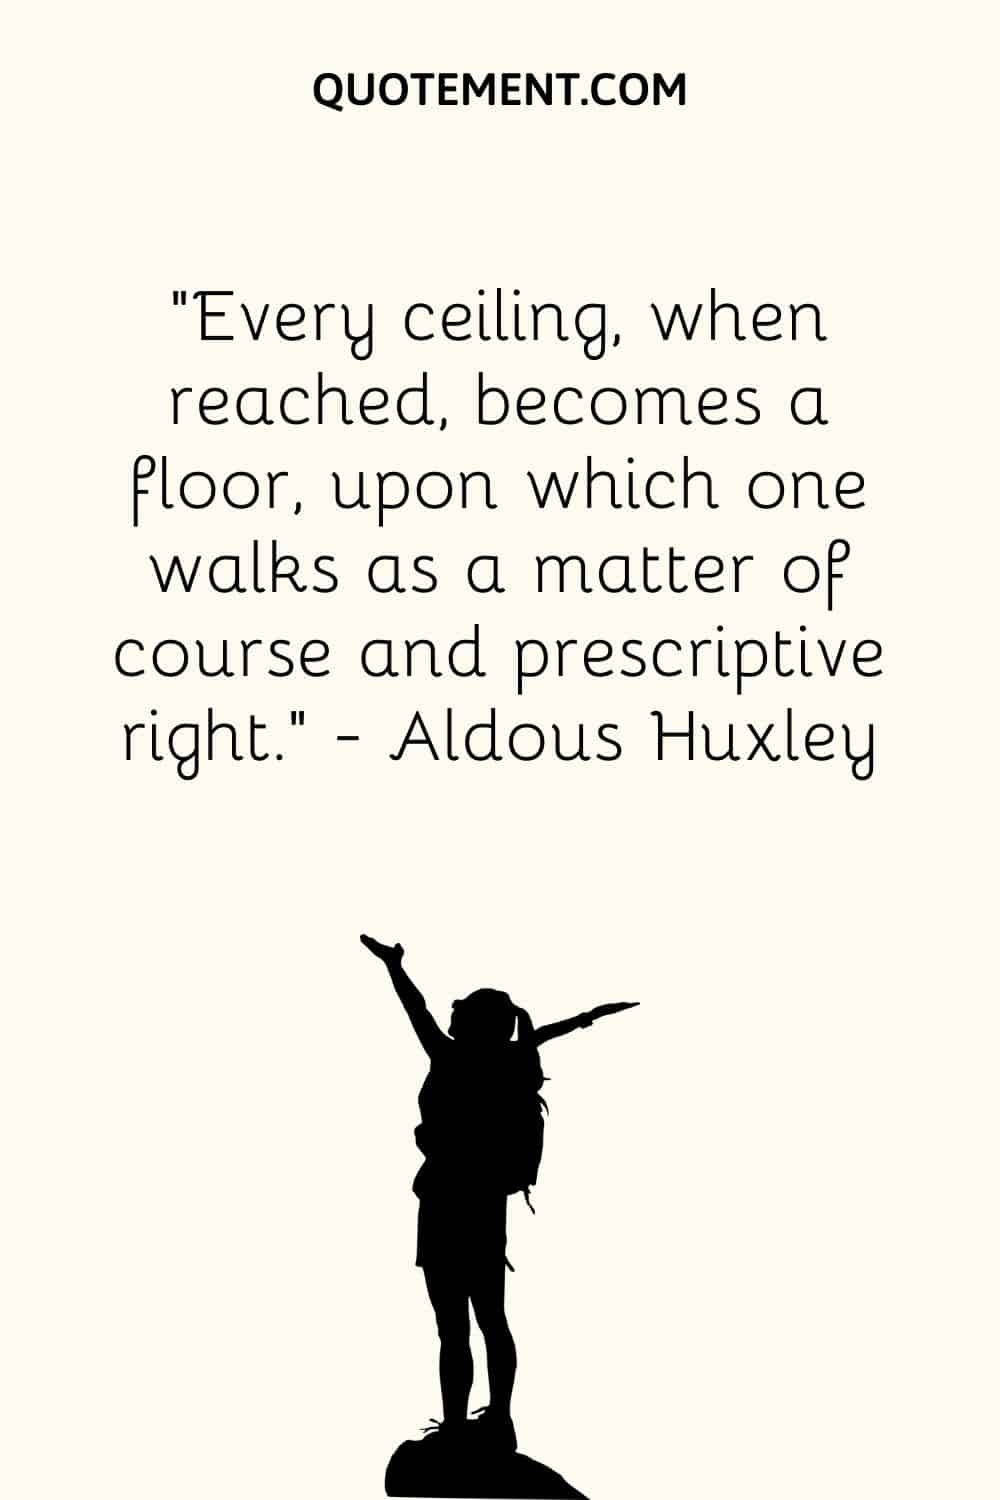 Every ceiling, when reached, becomes a floor, upon which one walks as a matter of course and prescriptive right